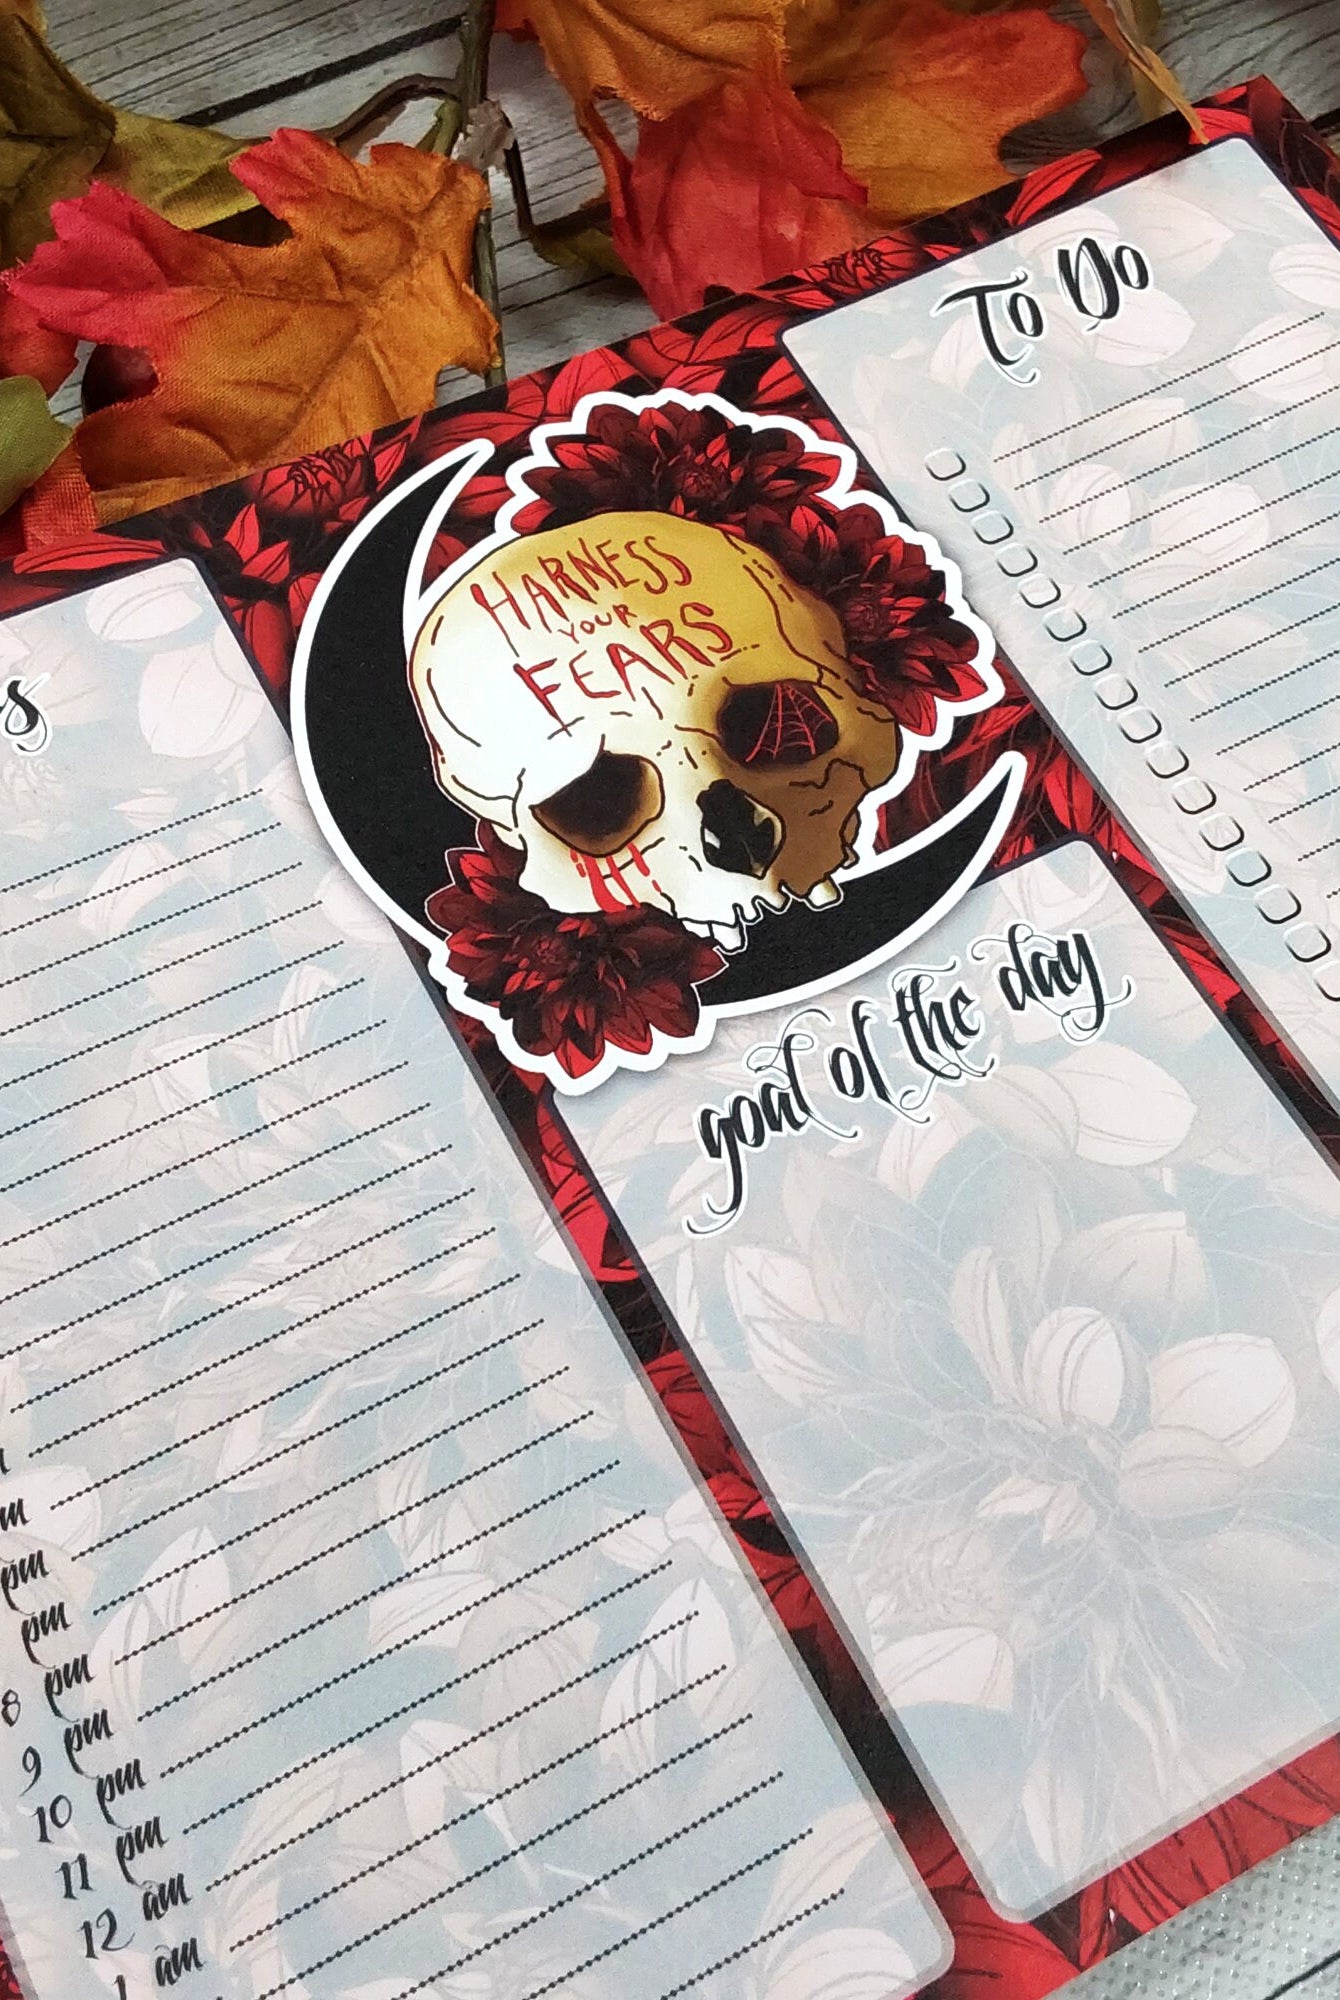 Harness Your Fears Skull and Dahlia Flowers Hourly Planner